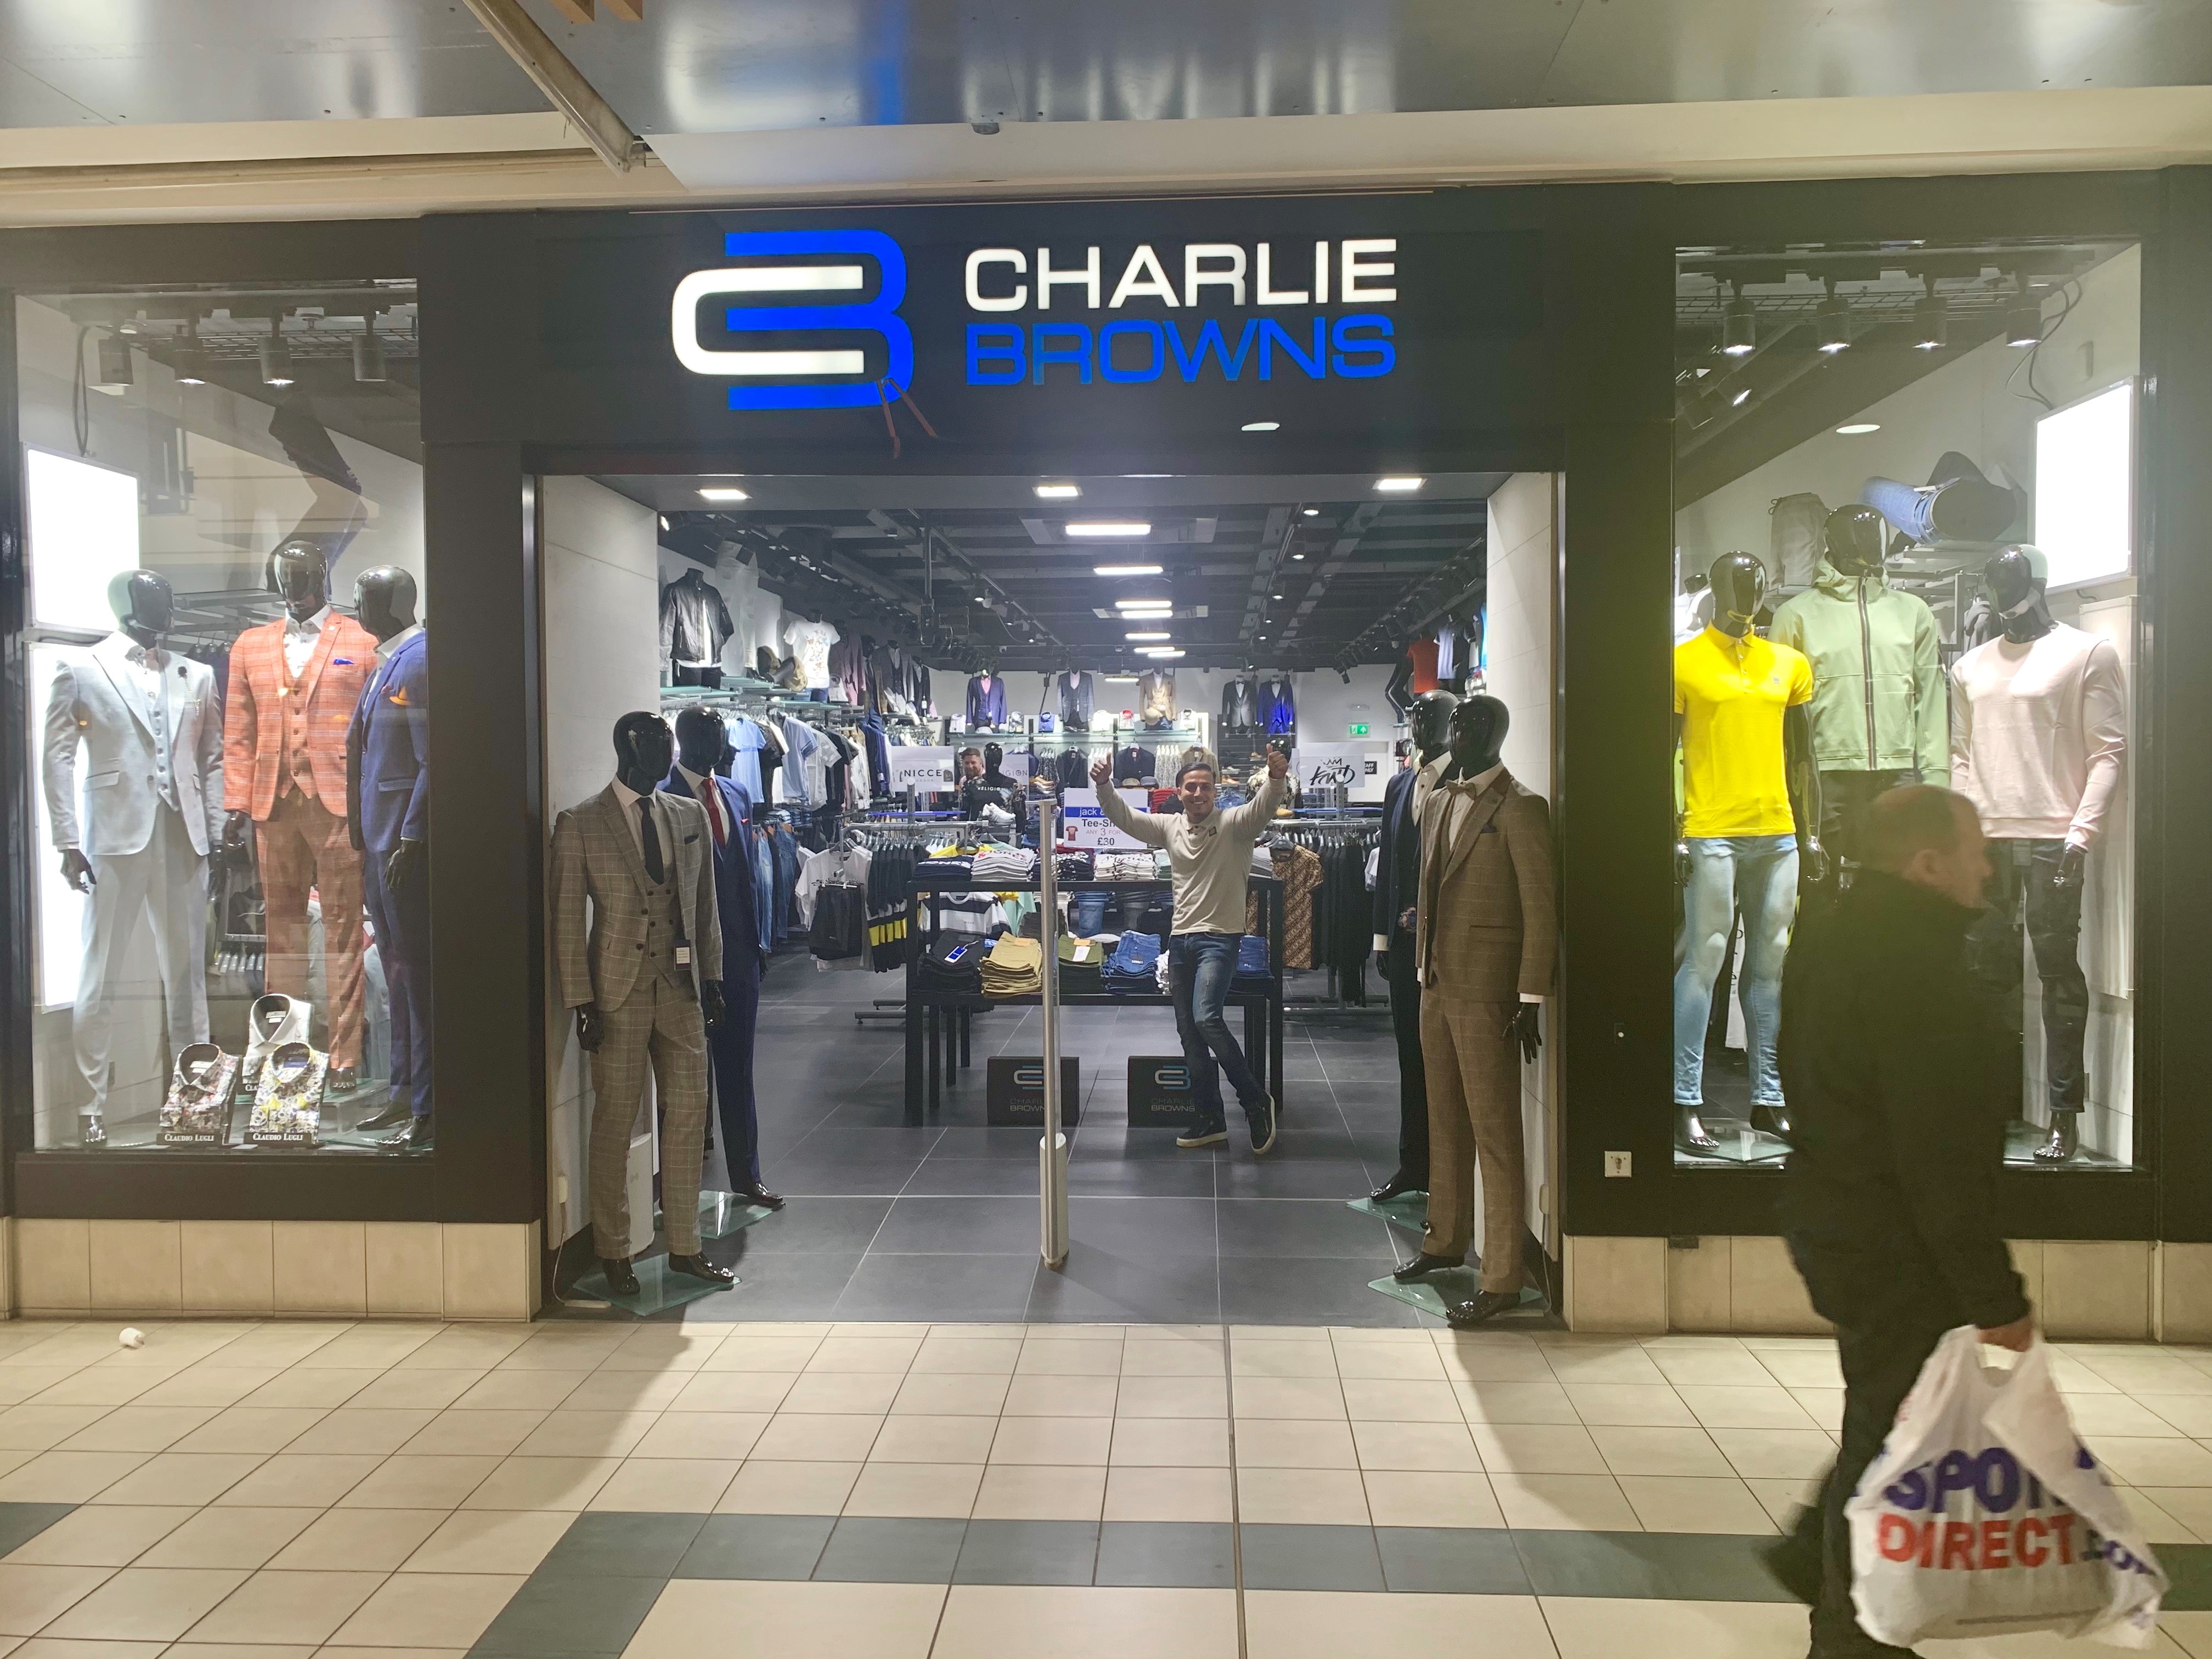 Charlie Browns opens in Coopers Square, Burton-upon-Trent